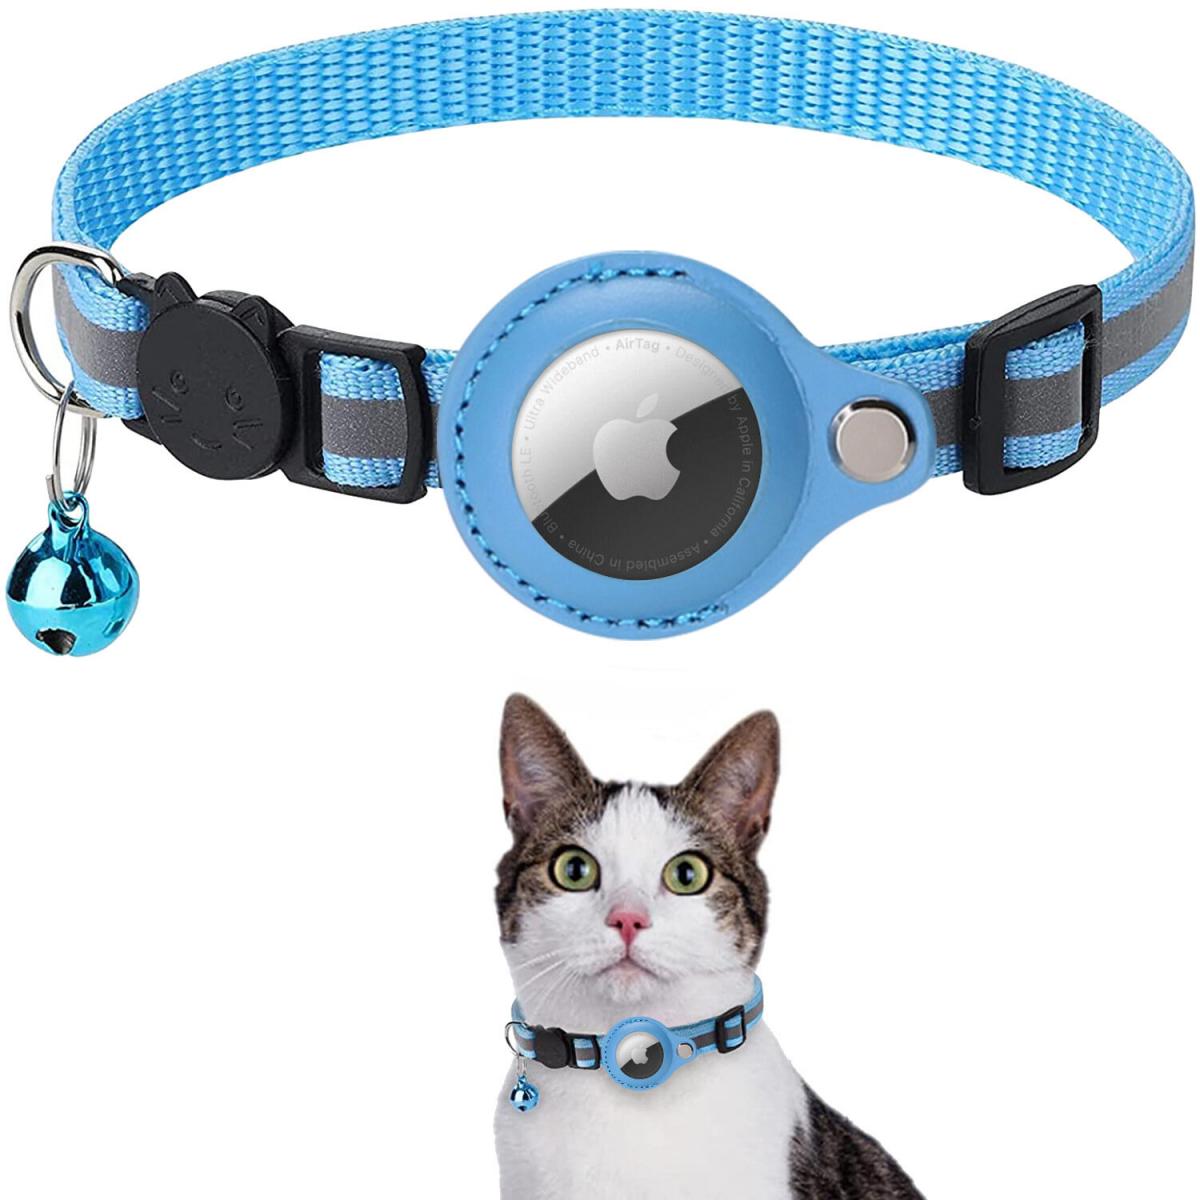 Cat positioning collar suitable for Apple Airtag tracker protective cover to prevent lost pets reflective collar cat tag pendant